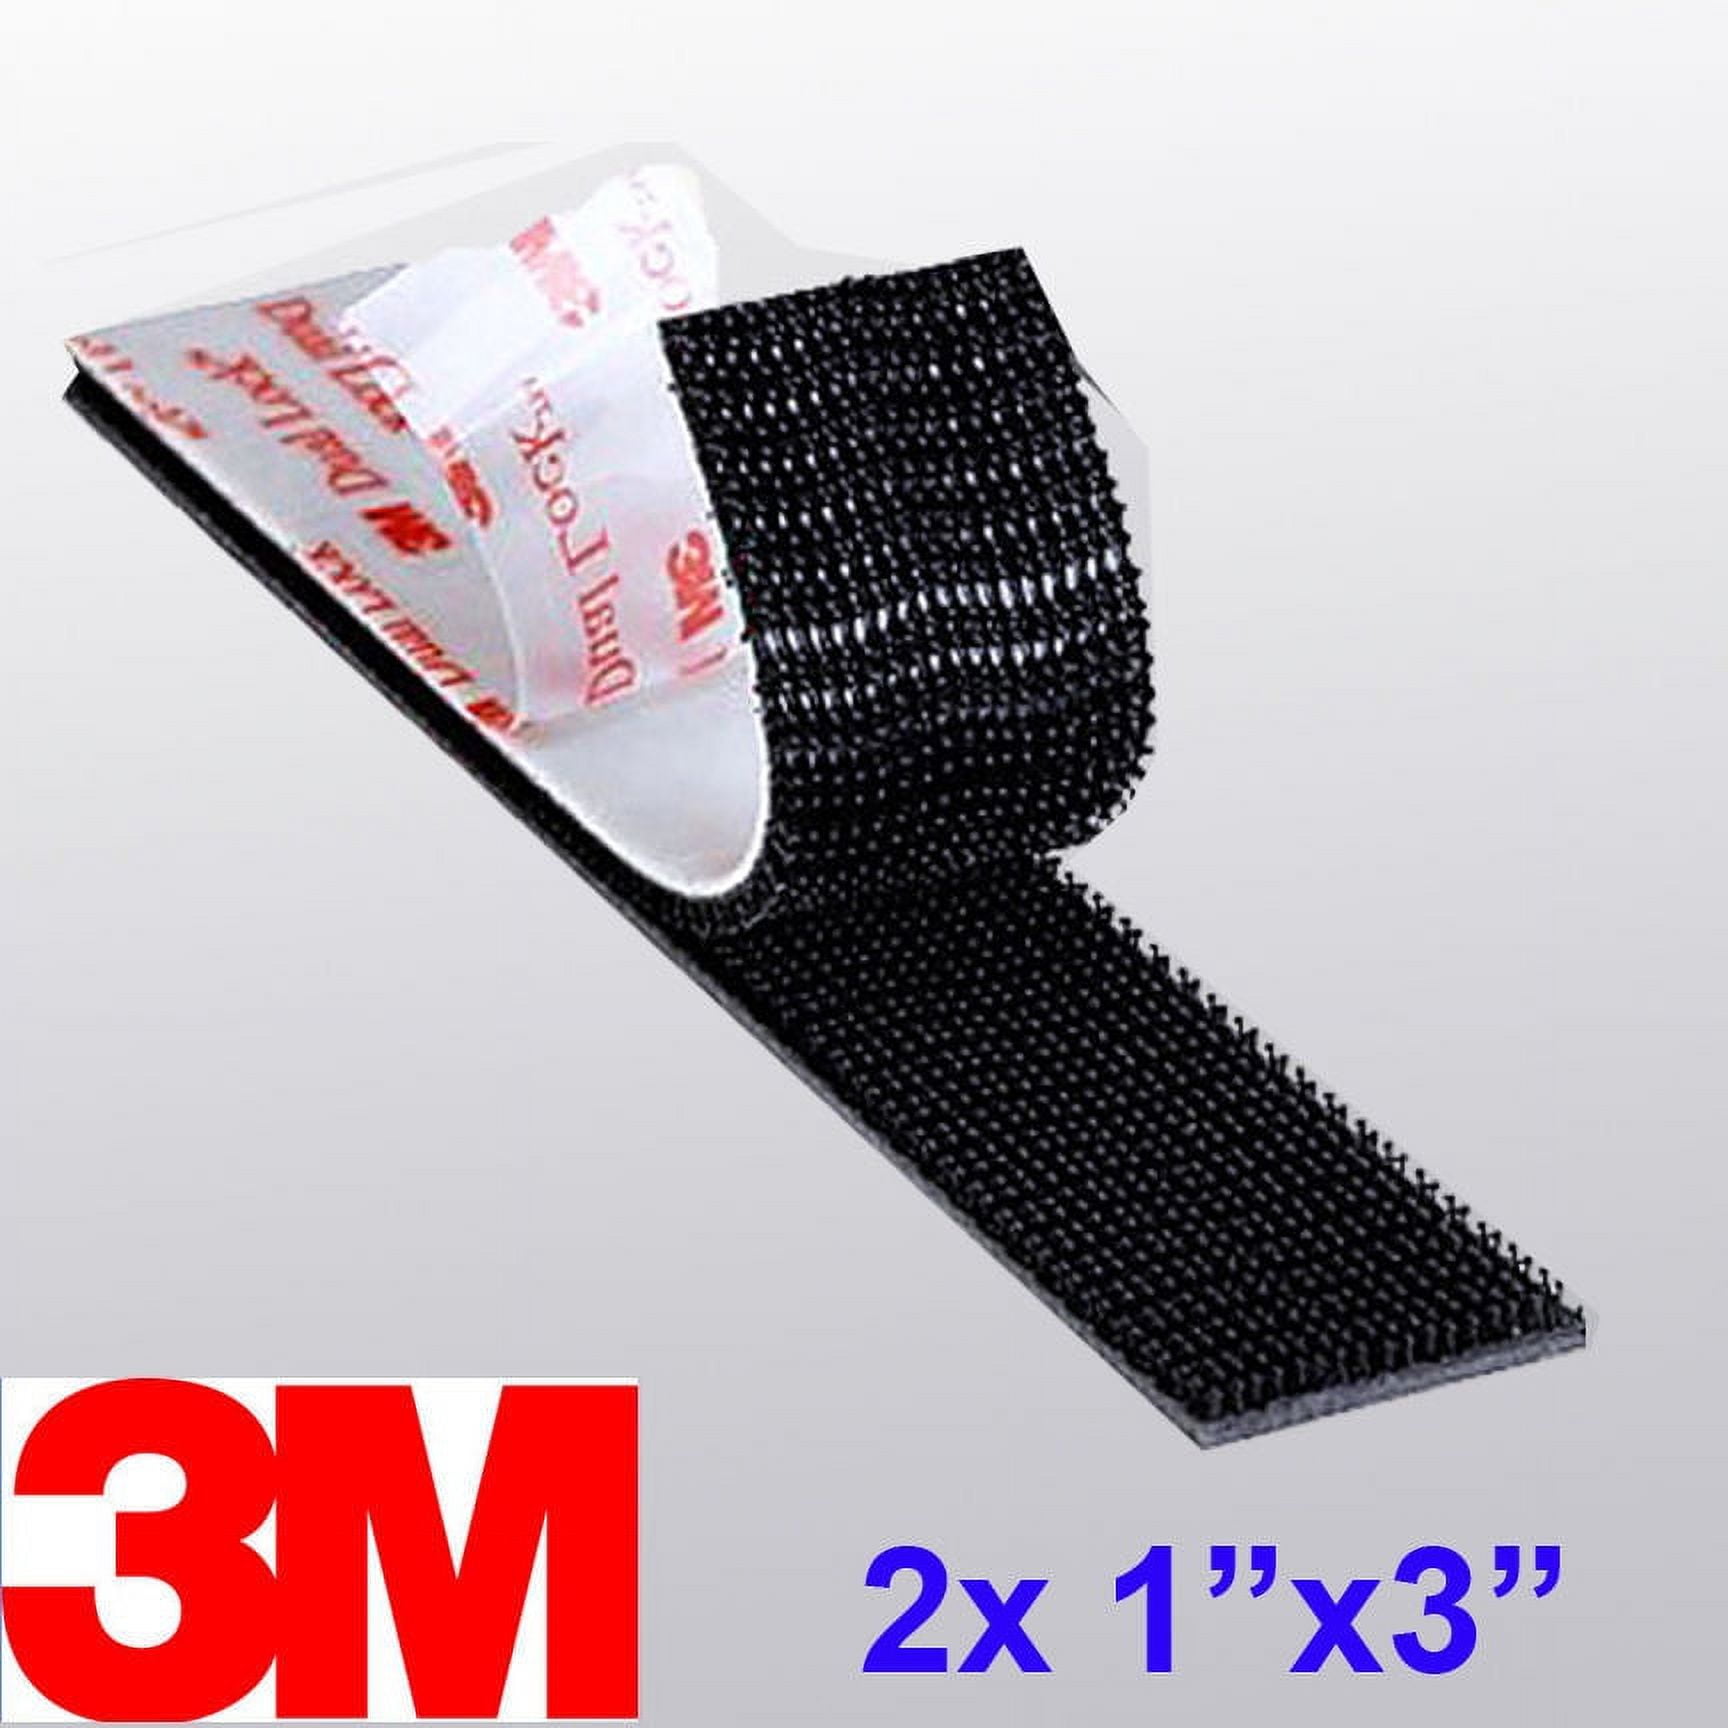 Genuine 3M Dual Lock SJ3550 Type 250 VHB Black Reclosable Fastener, 1  Width x 5' (60 inch) Indoor/Outdoor Mobile Glass E-Zpass Mounting Strips 